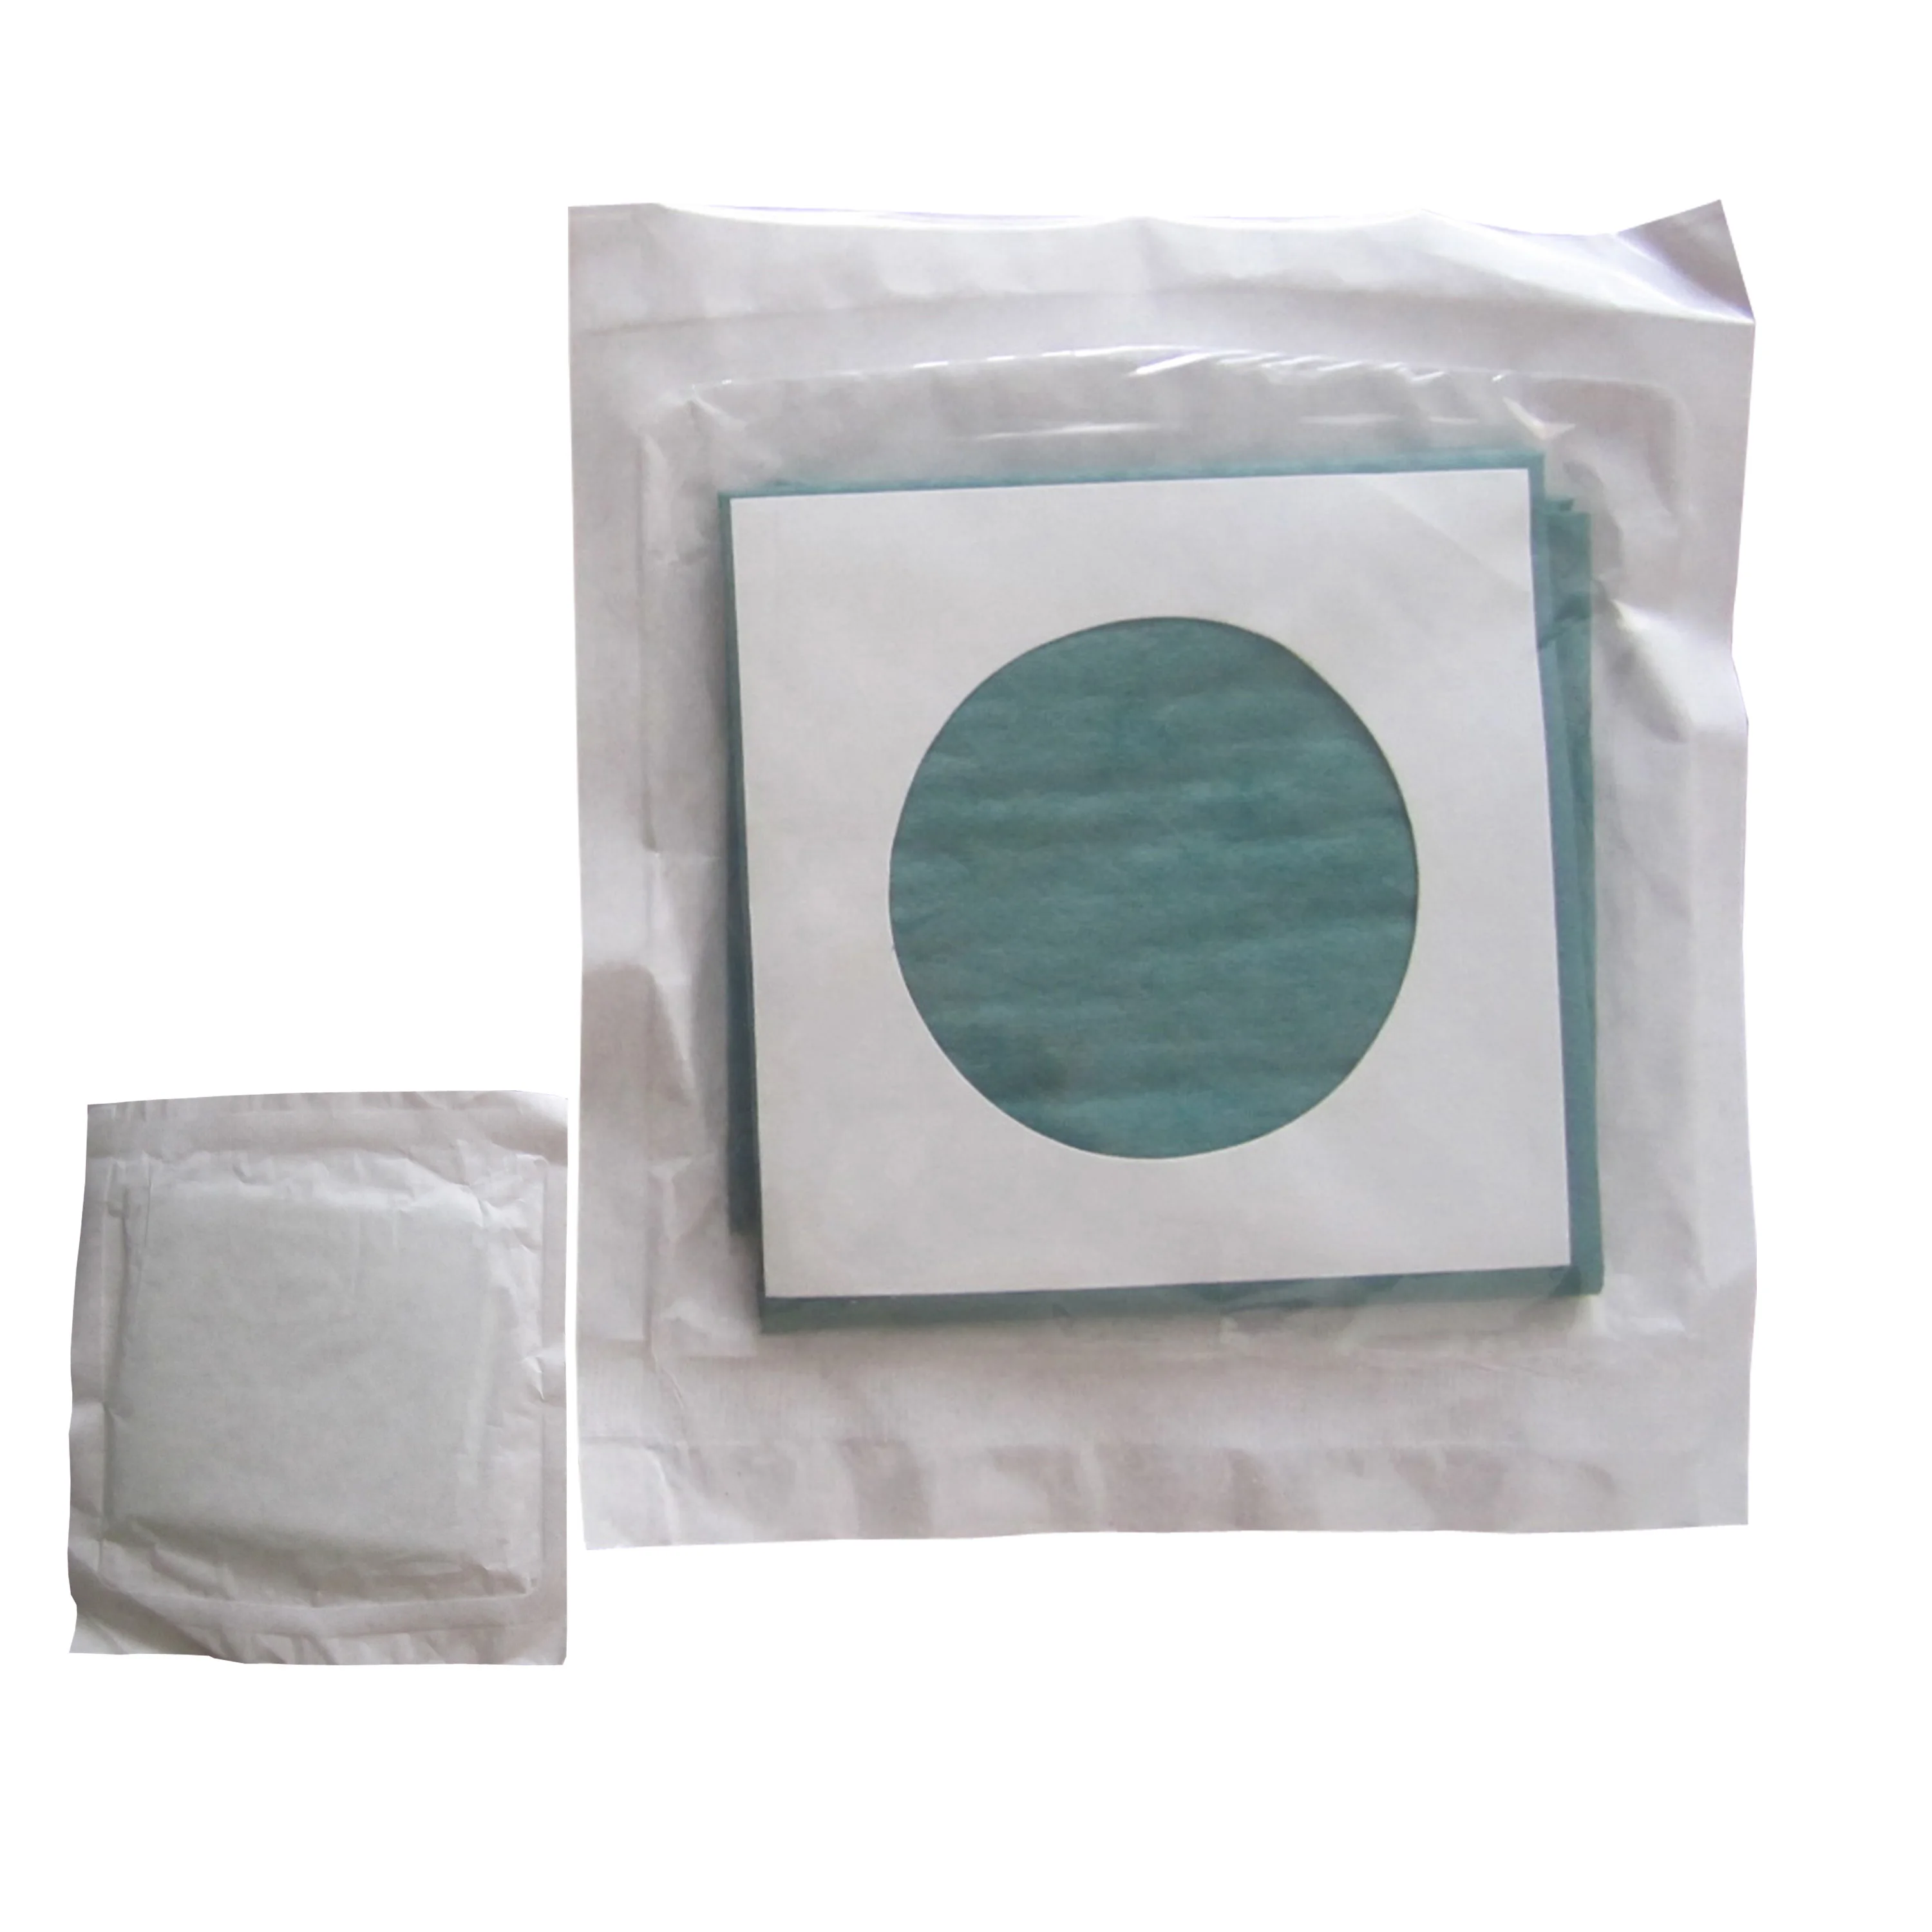 Sterile absorbent paper fenestrated drapes surgical drape with hole